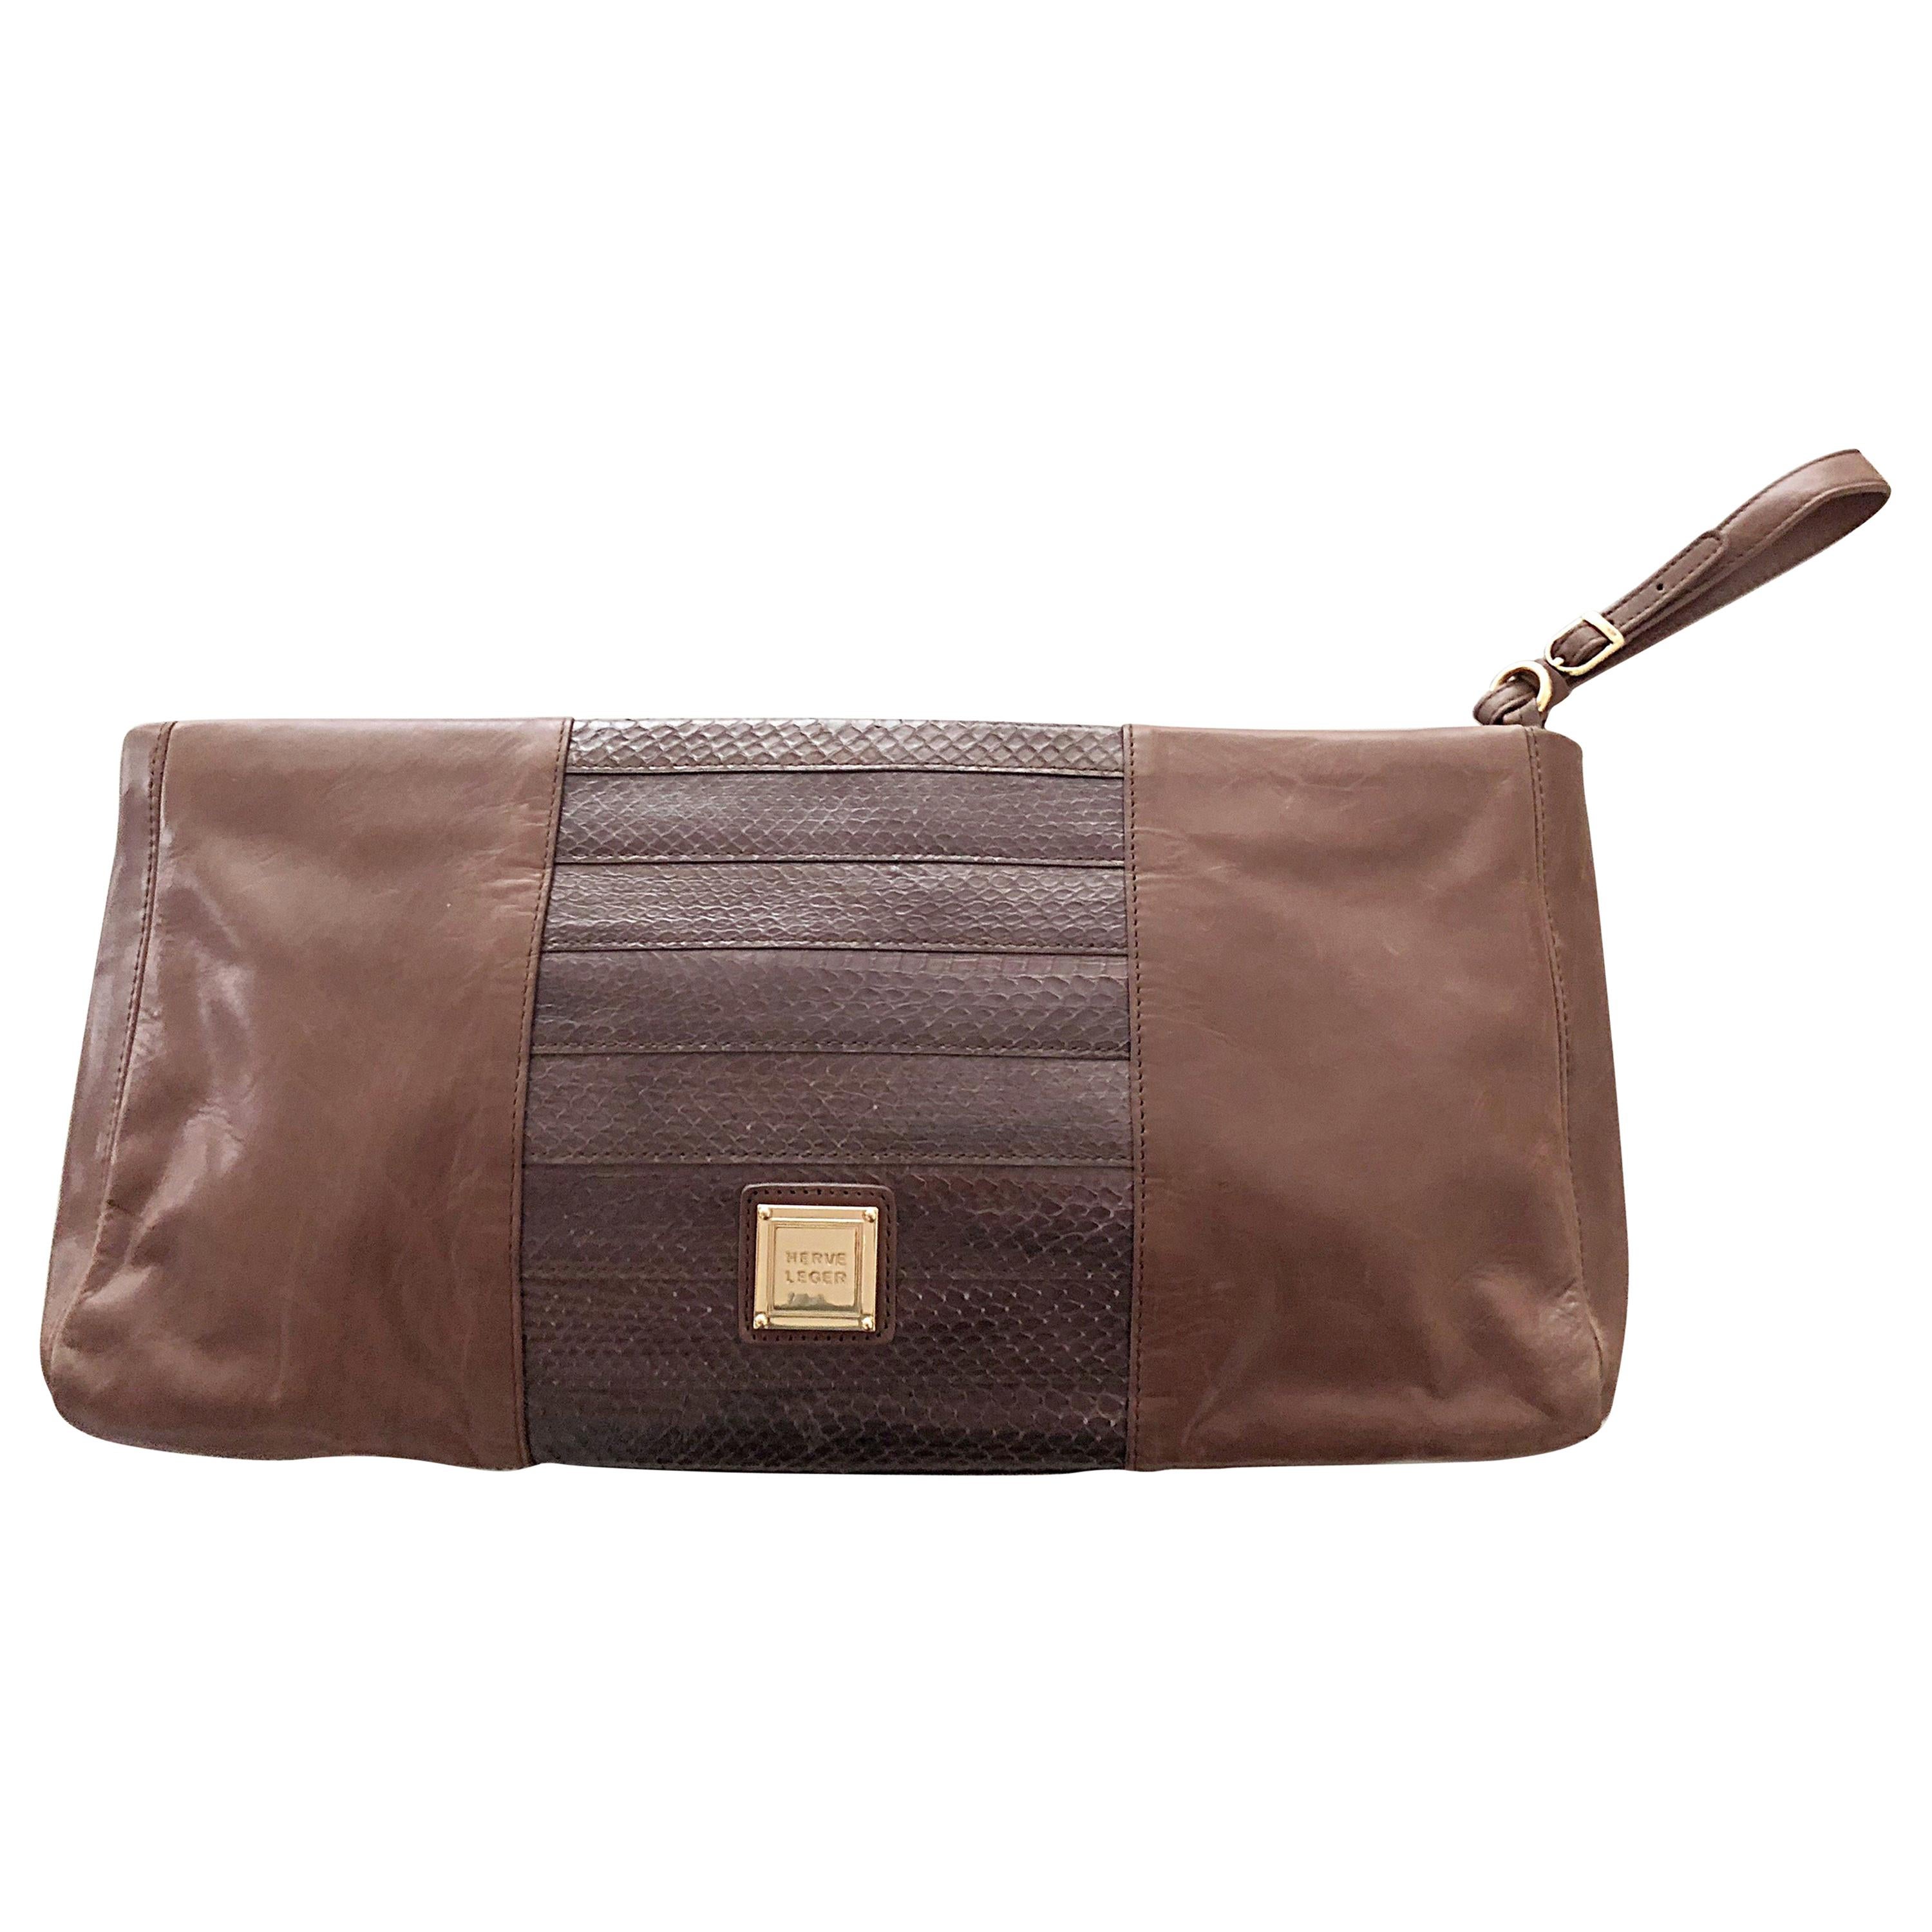 Herve Leger Snake + Leather Taupe Brown Extra Large Wristlet Large Clutch